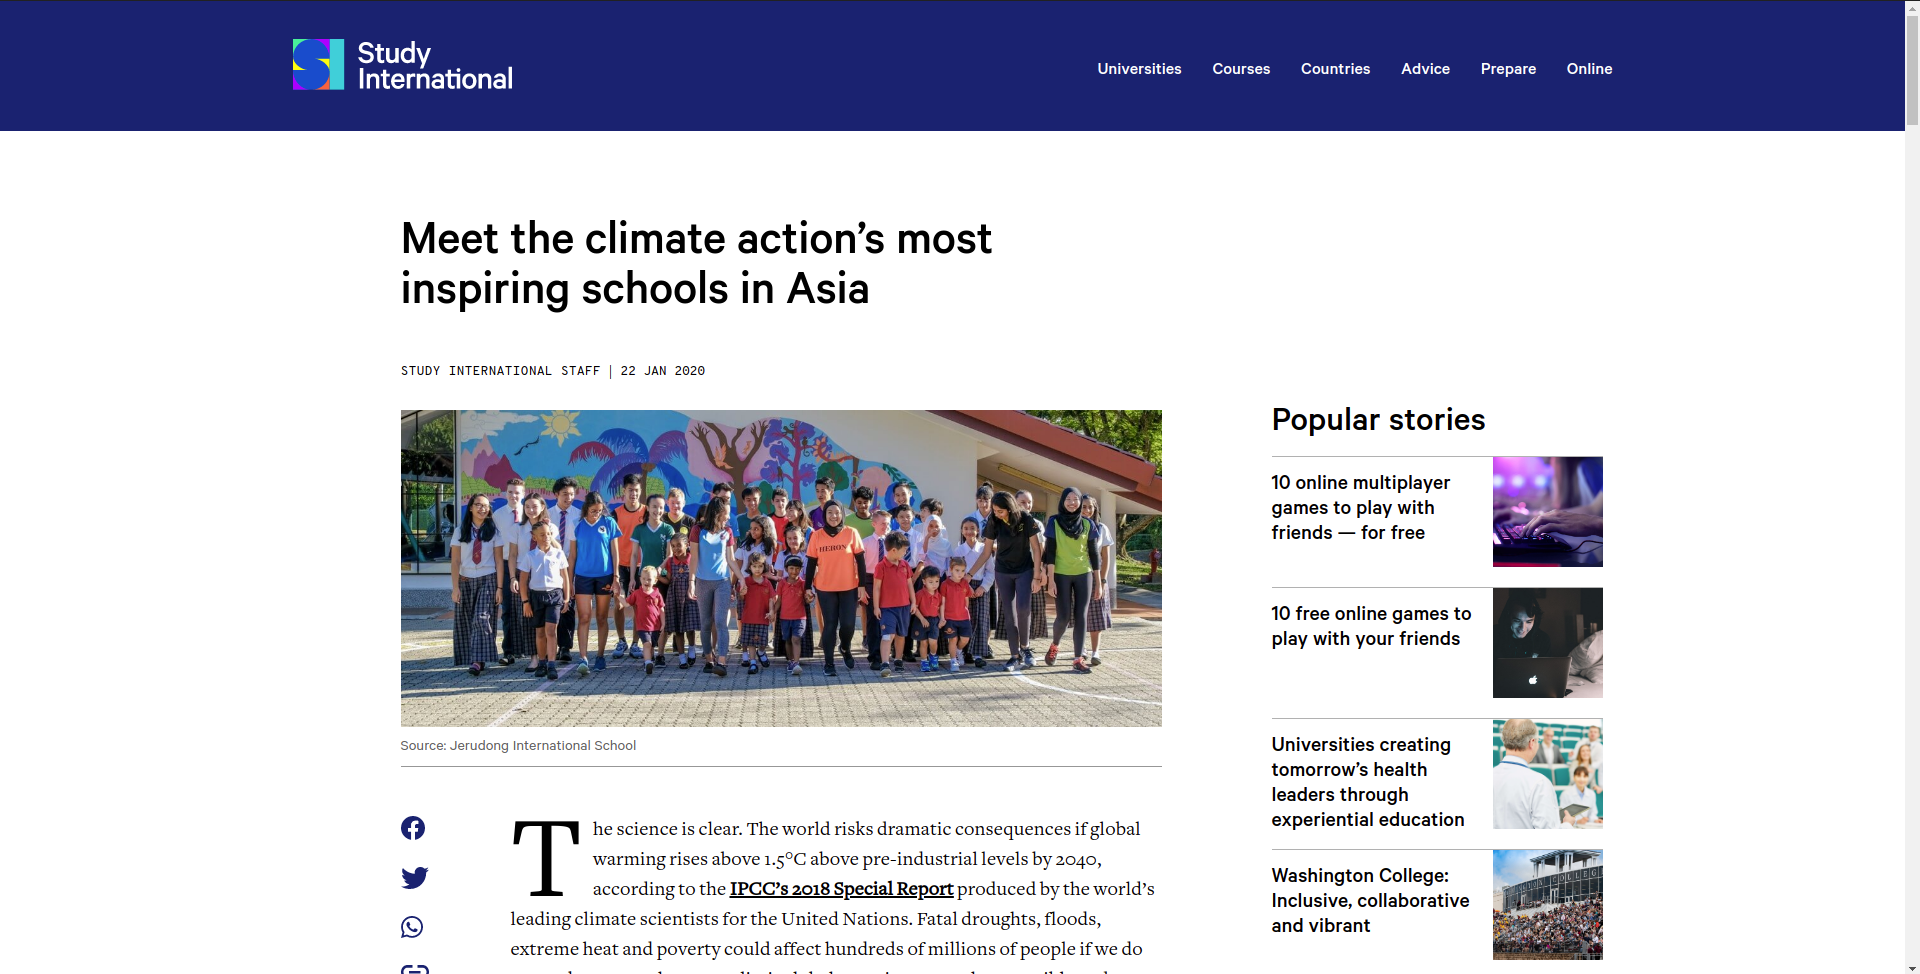 Meet the Climate Action’s Most Inspiring Schools in Asia